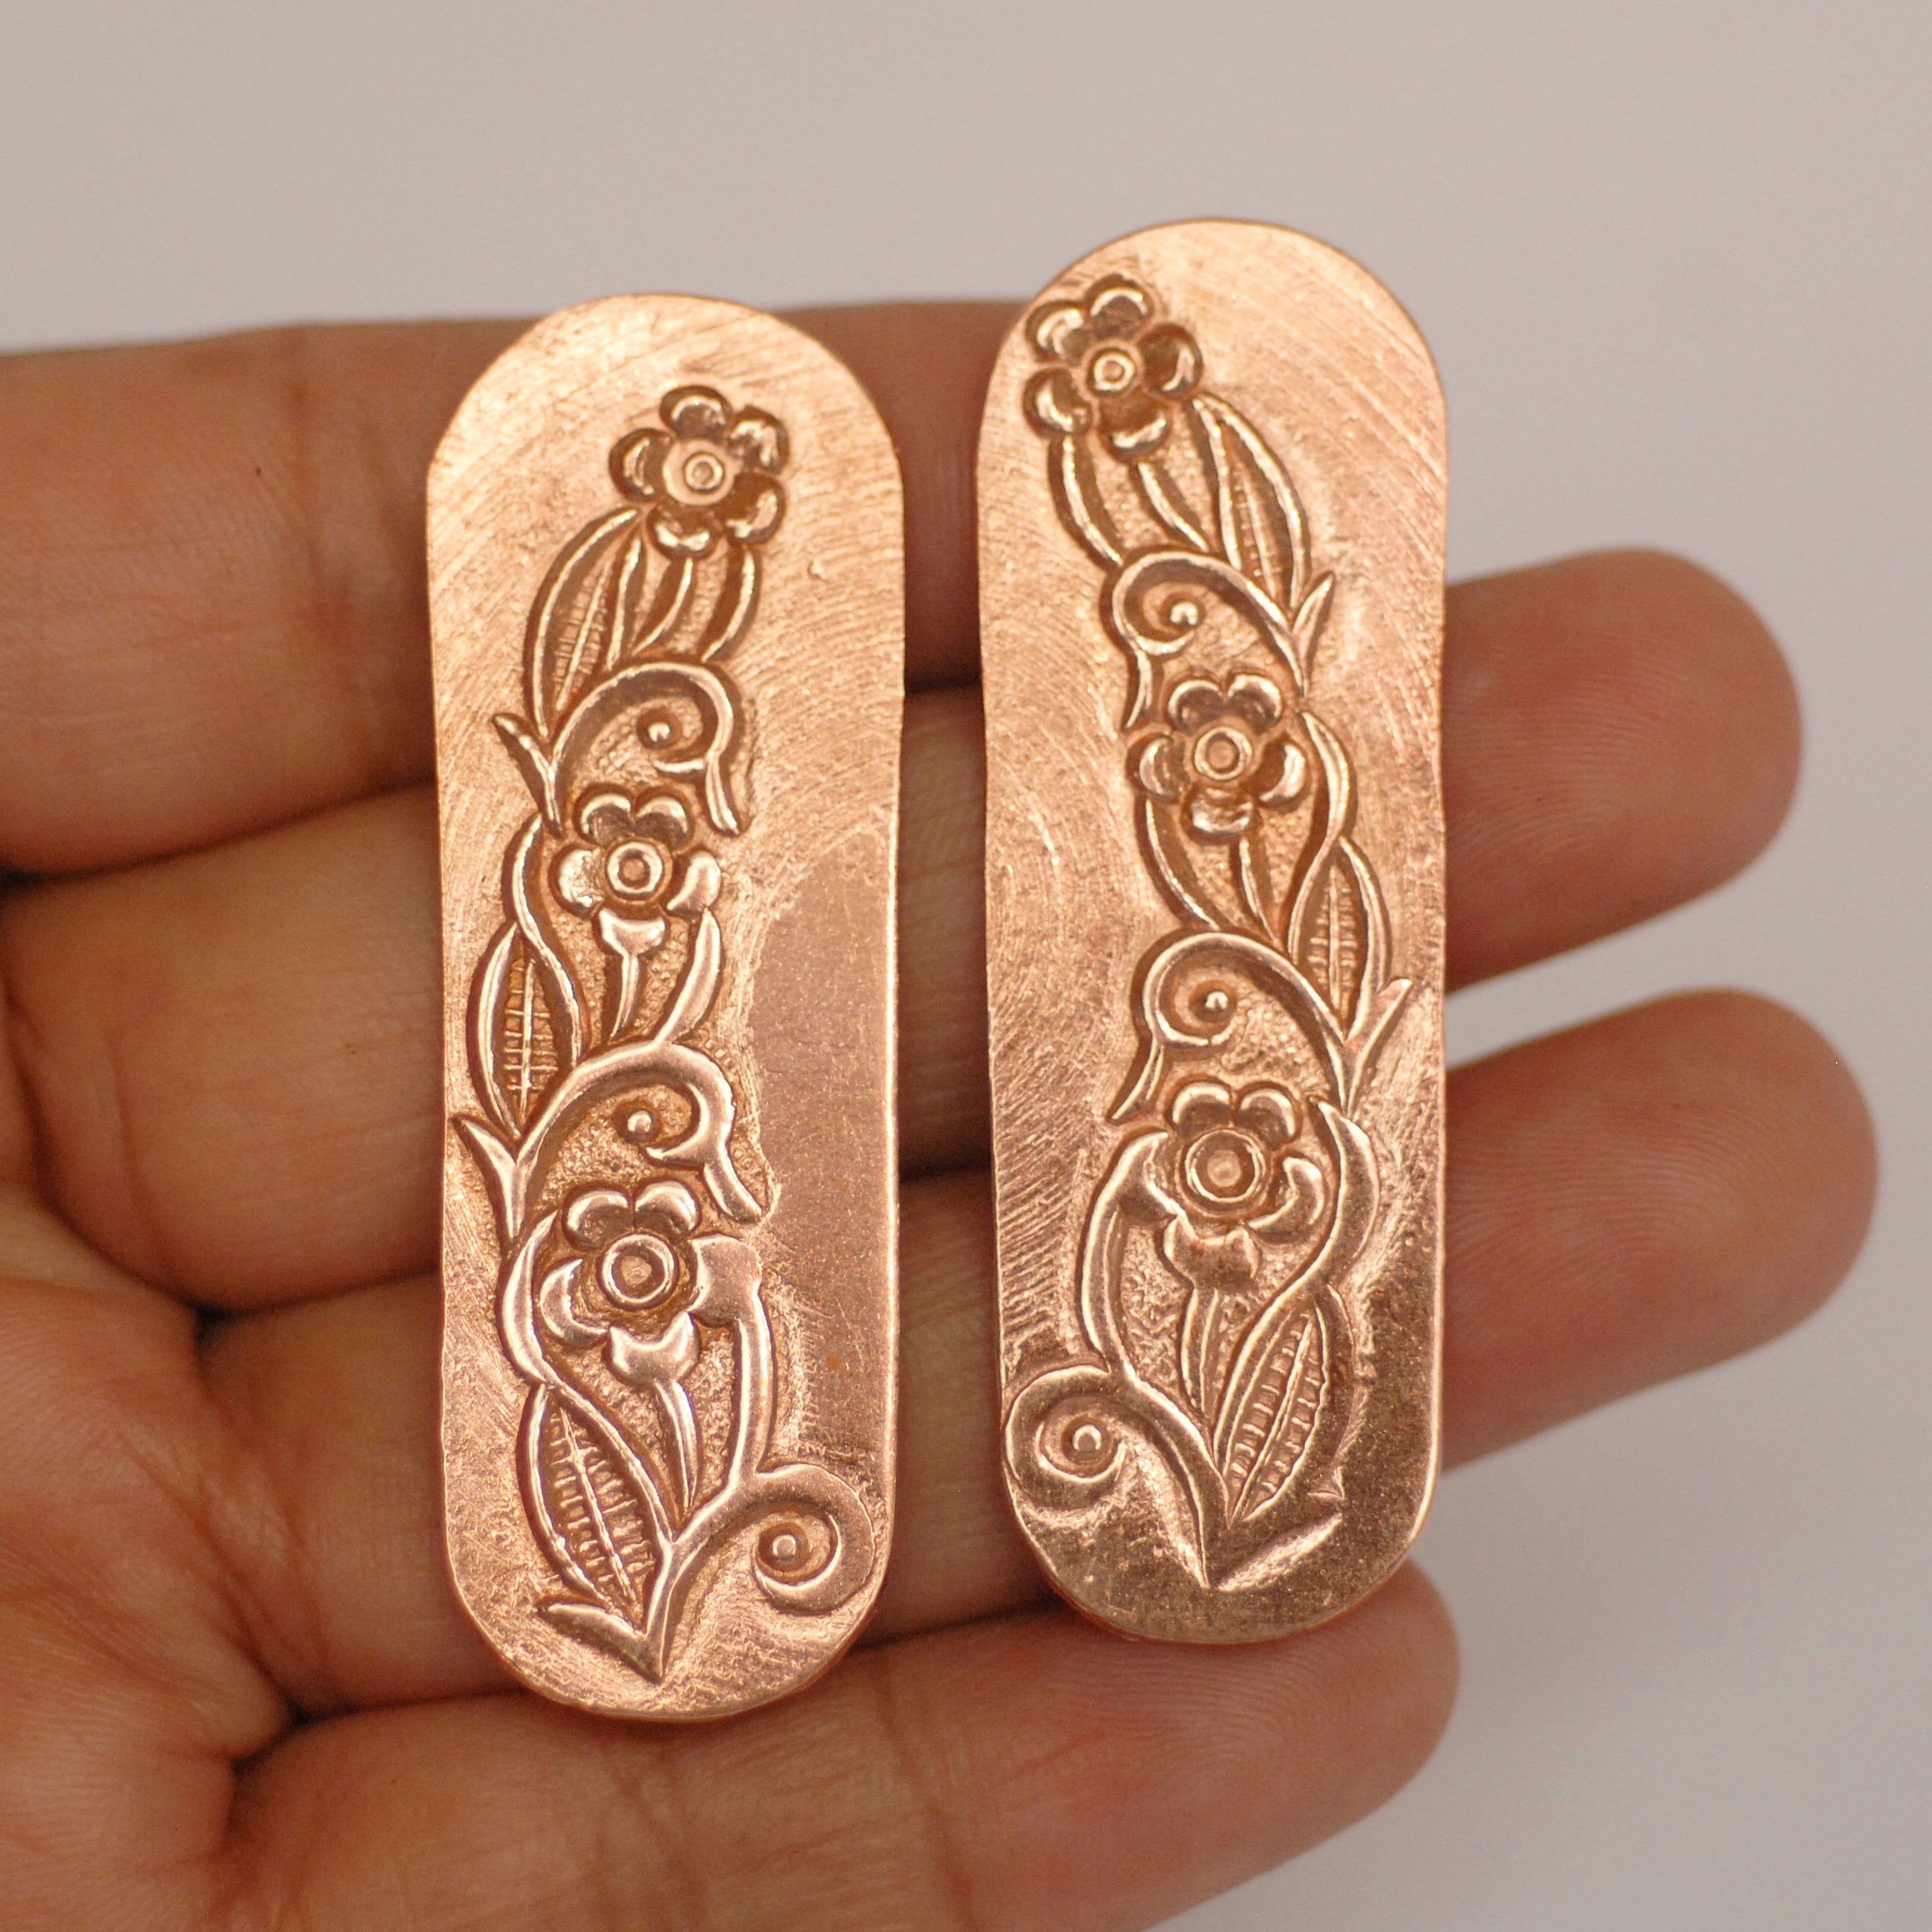 Rounded oval shapes w/ floral texture metal blanks - Solid copper